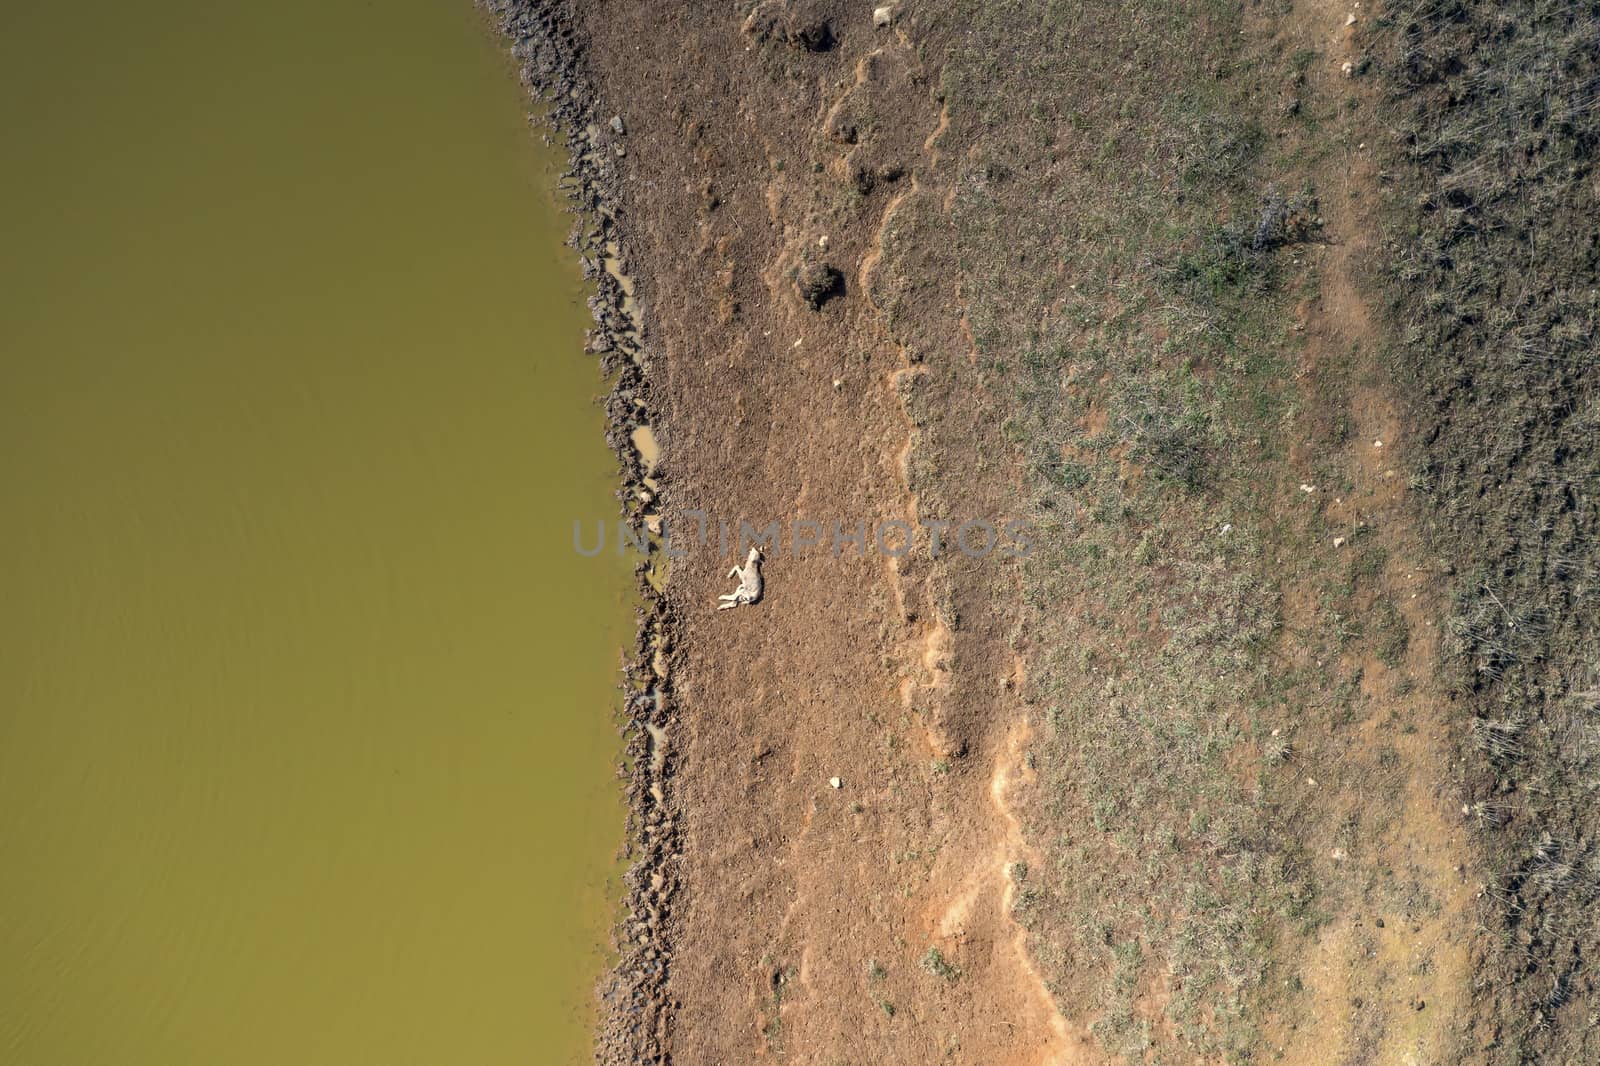 A dead lamb lying next a dry agricultural irrigation dam in regional Australia by WittkePhotos